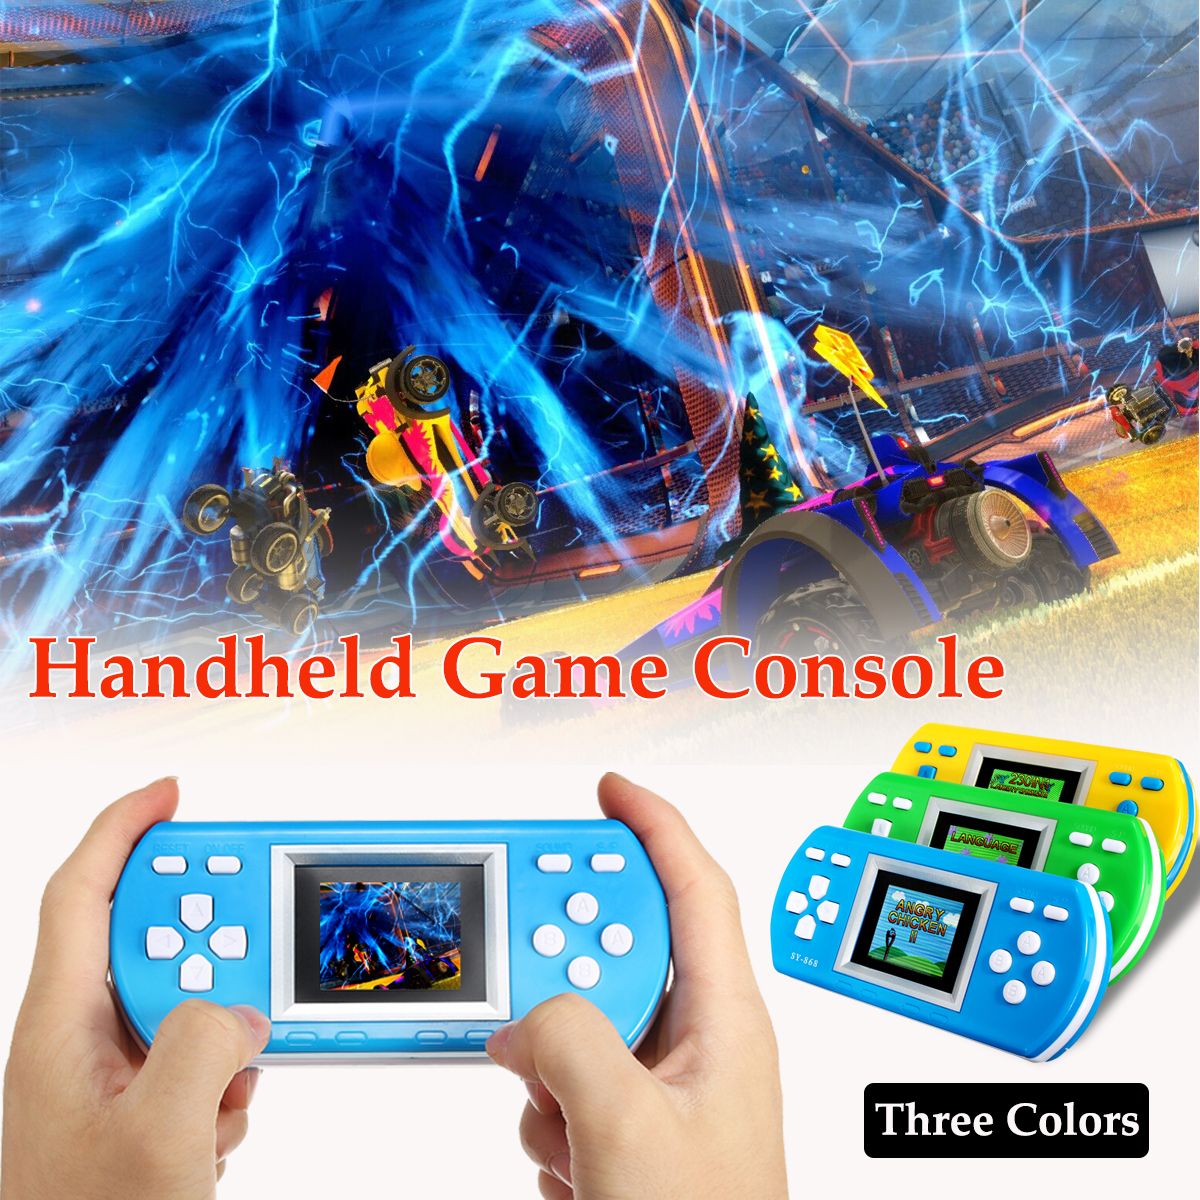 SY-868-230-in-1-18-Inch-Screen-Digital-Colorful-Handheld-Retro-Game-Console-1344710